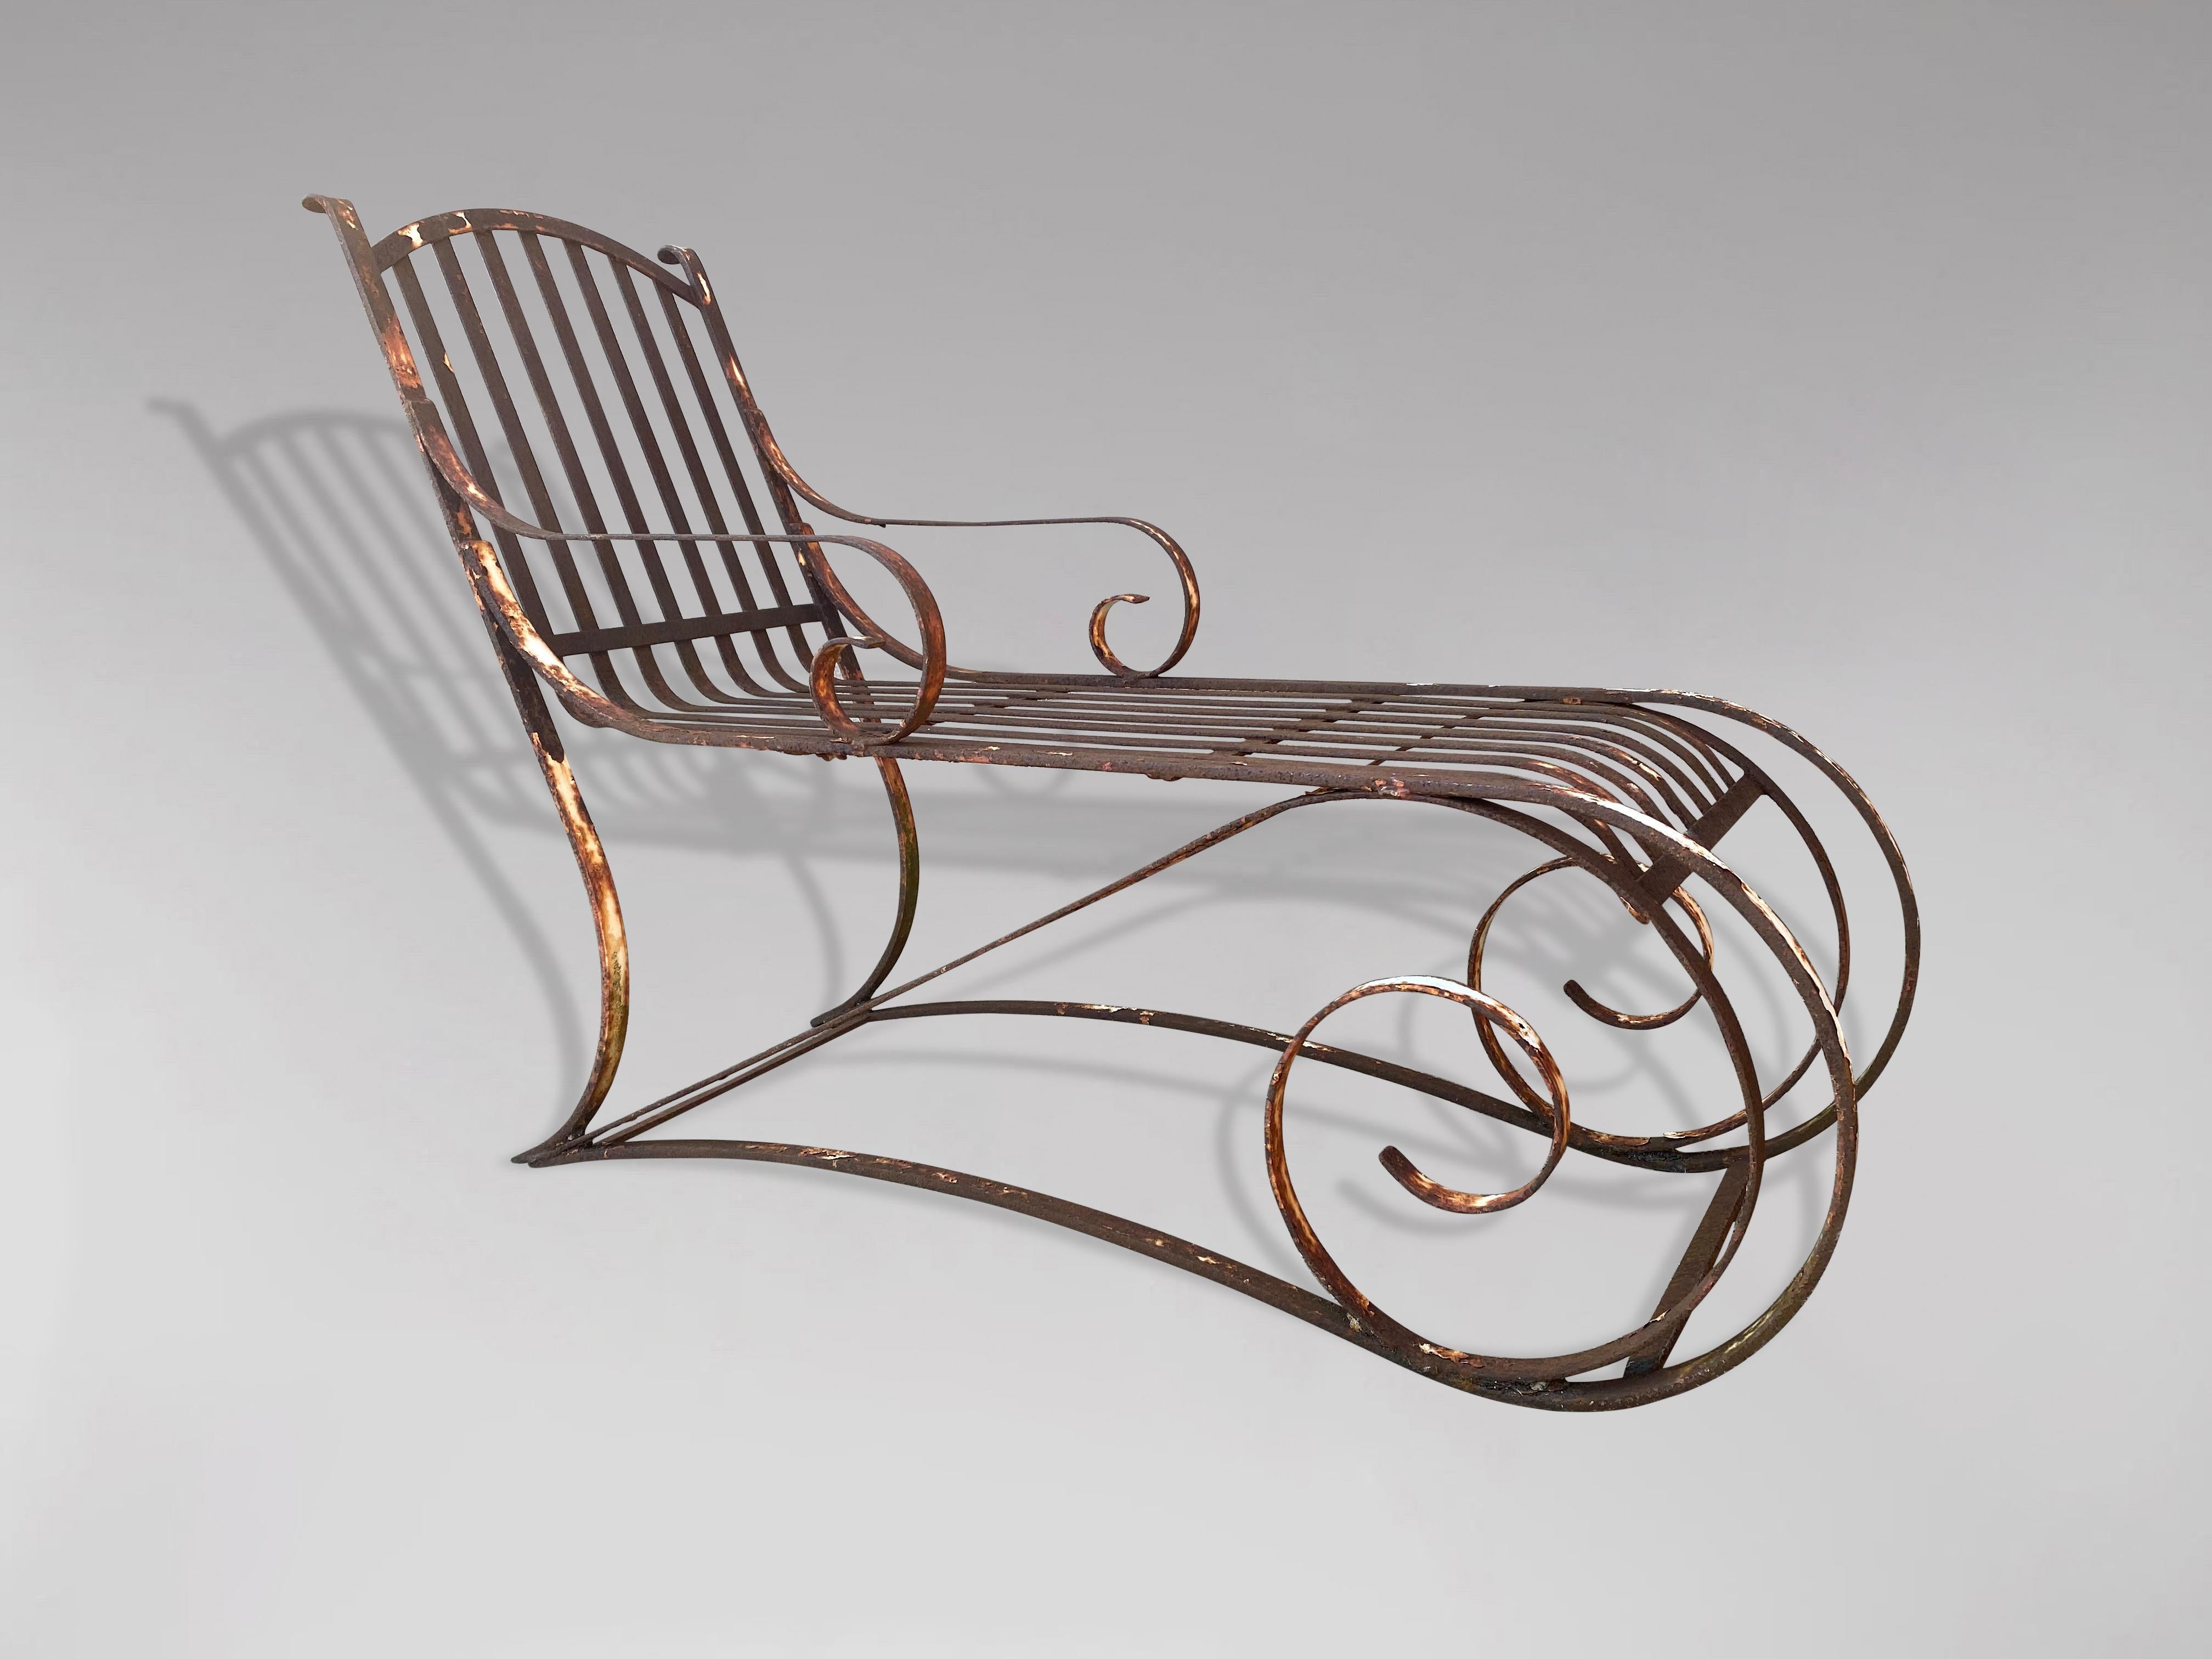 A beautiful 19th century French wrought iron chaise longue lounger of curved form. Heavily constructed with scrolling back, roll over arms and scrolling accents along the front. Completely original, in very strong condition with lovely proportions.